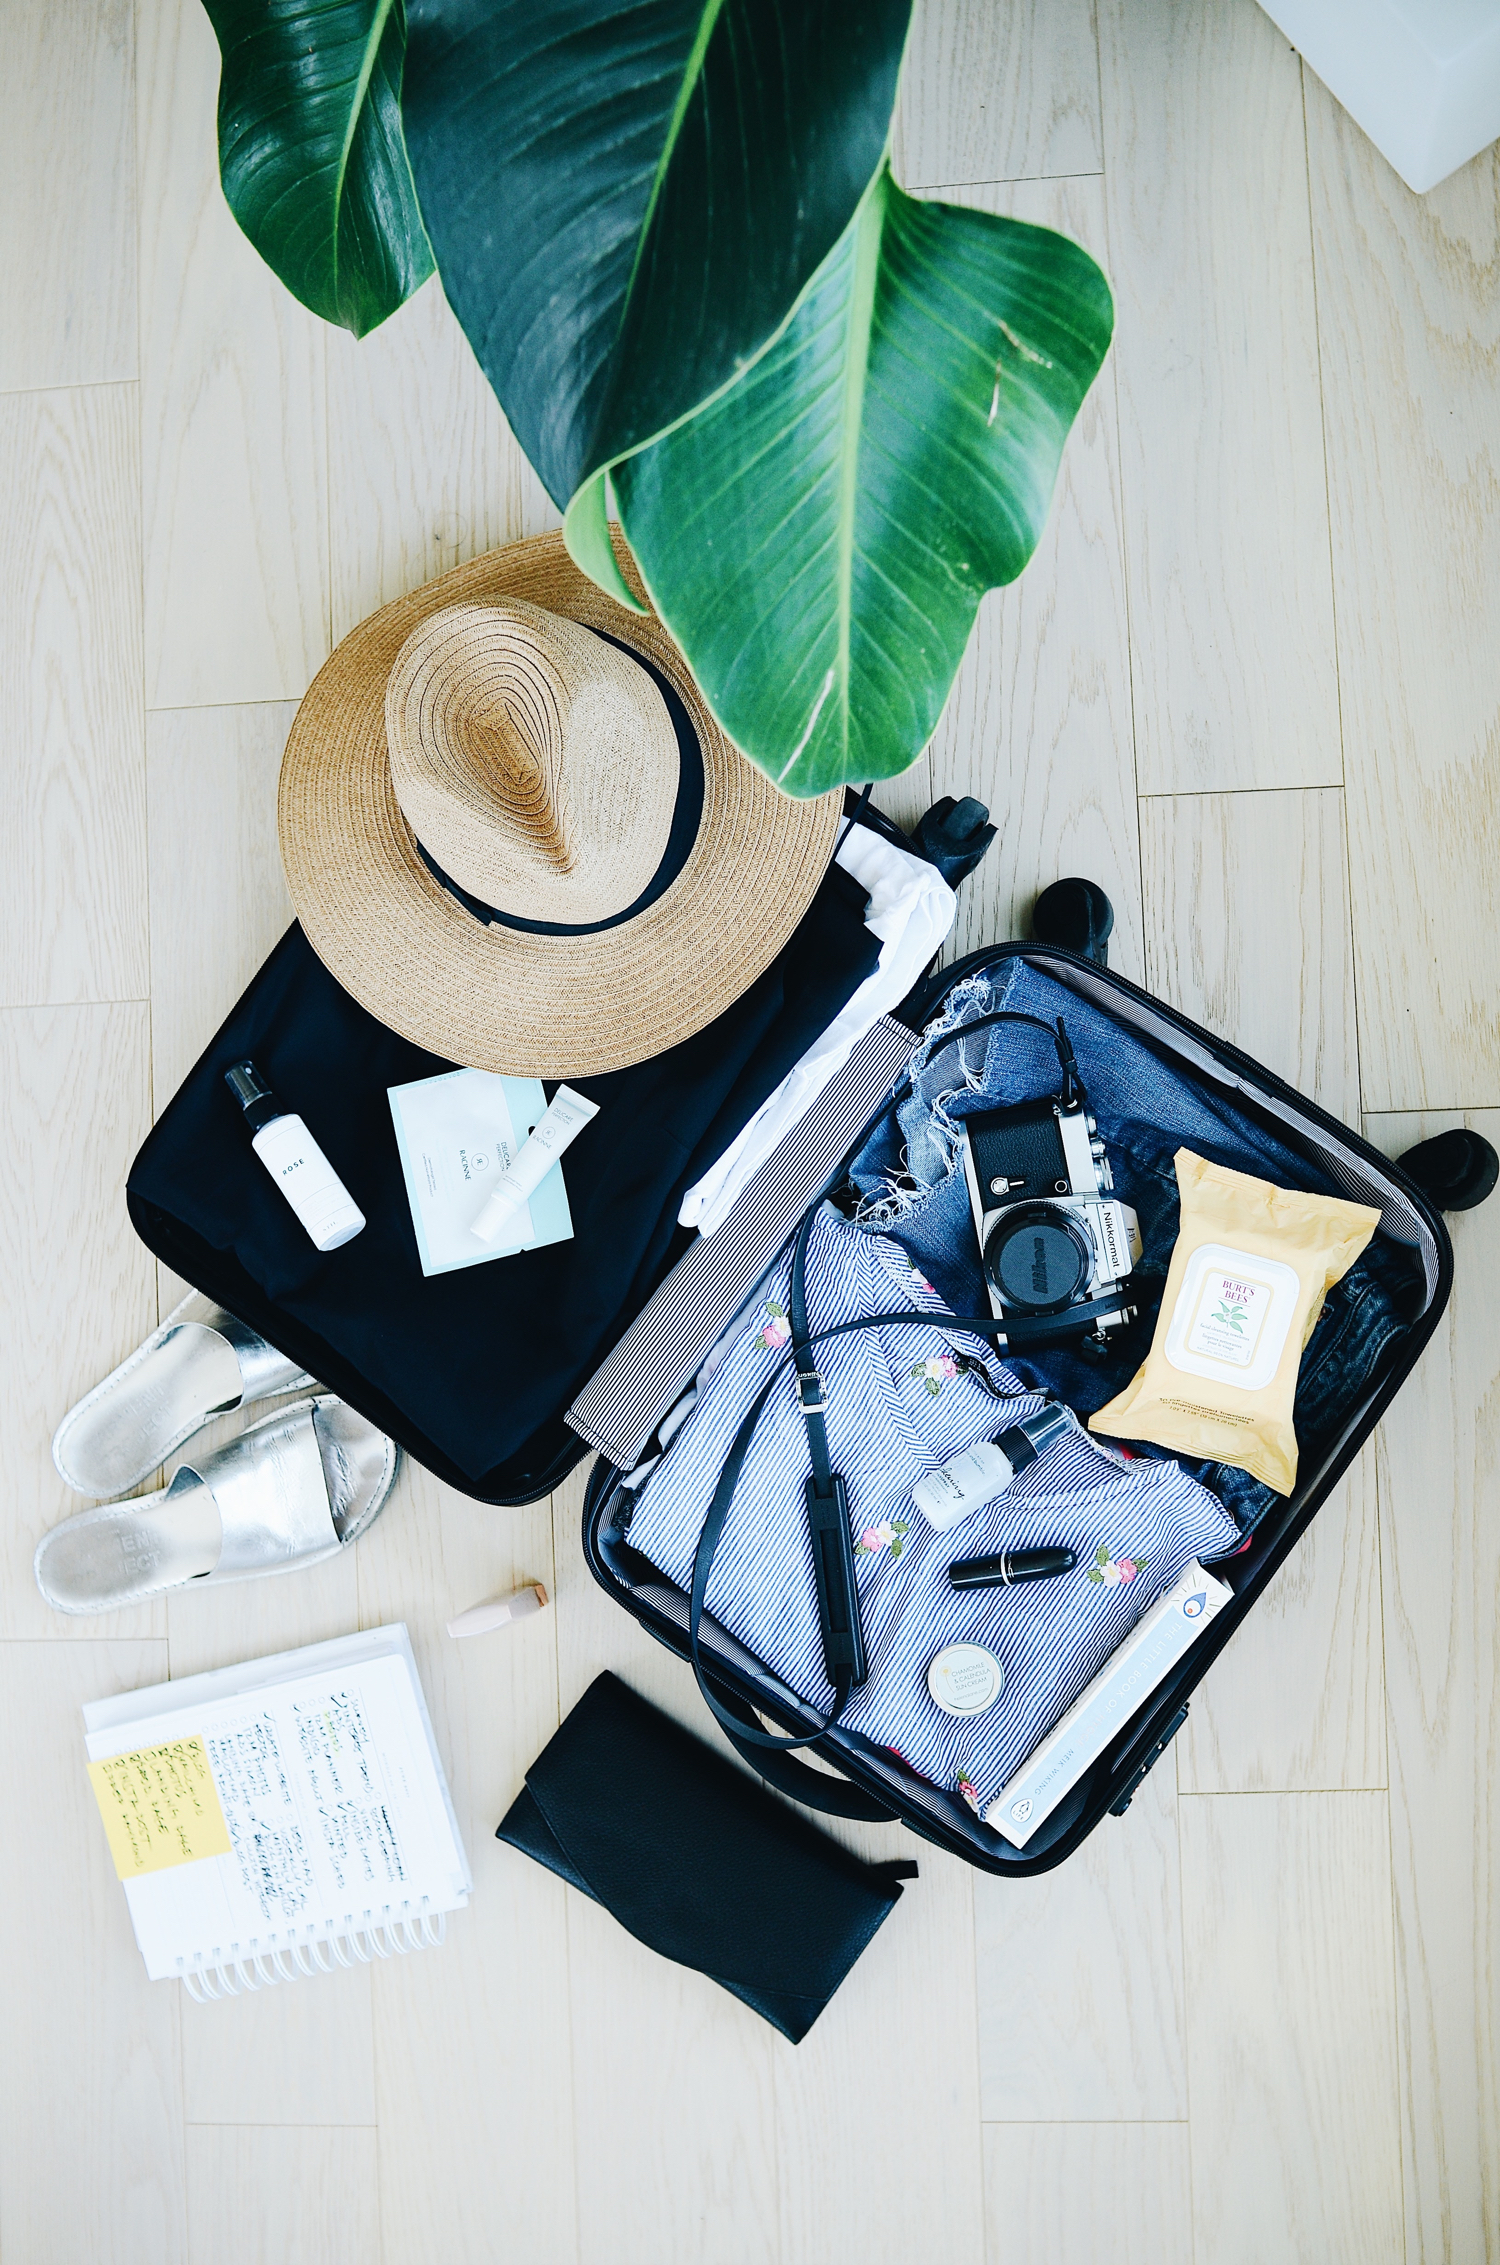 TRAVEL ESSENTIALS : Find out what I love to pack when I travel. I've got baggage. Like whoa! Read more on DESIGN THE LIFE YOU WANT TO LIVE by Lynne Knowlton